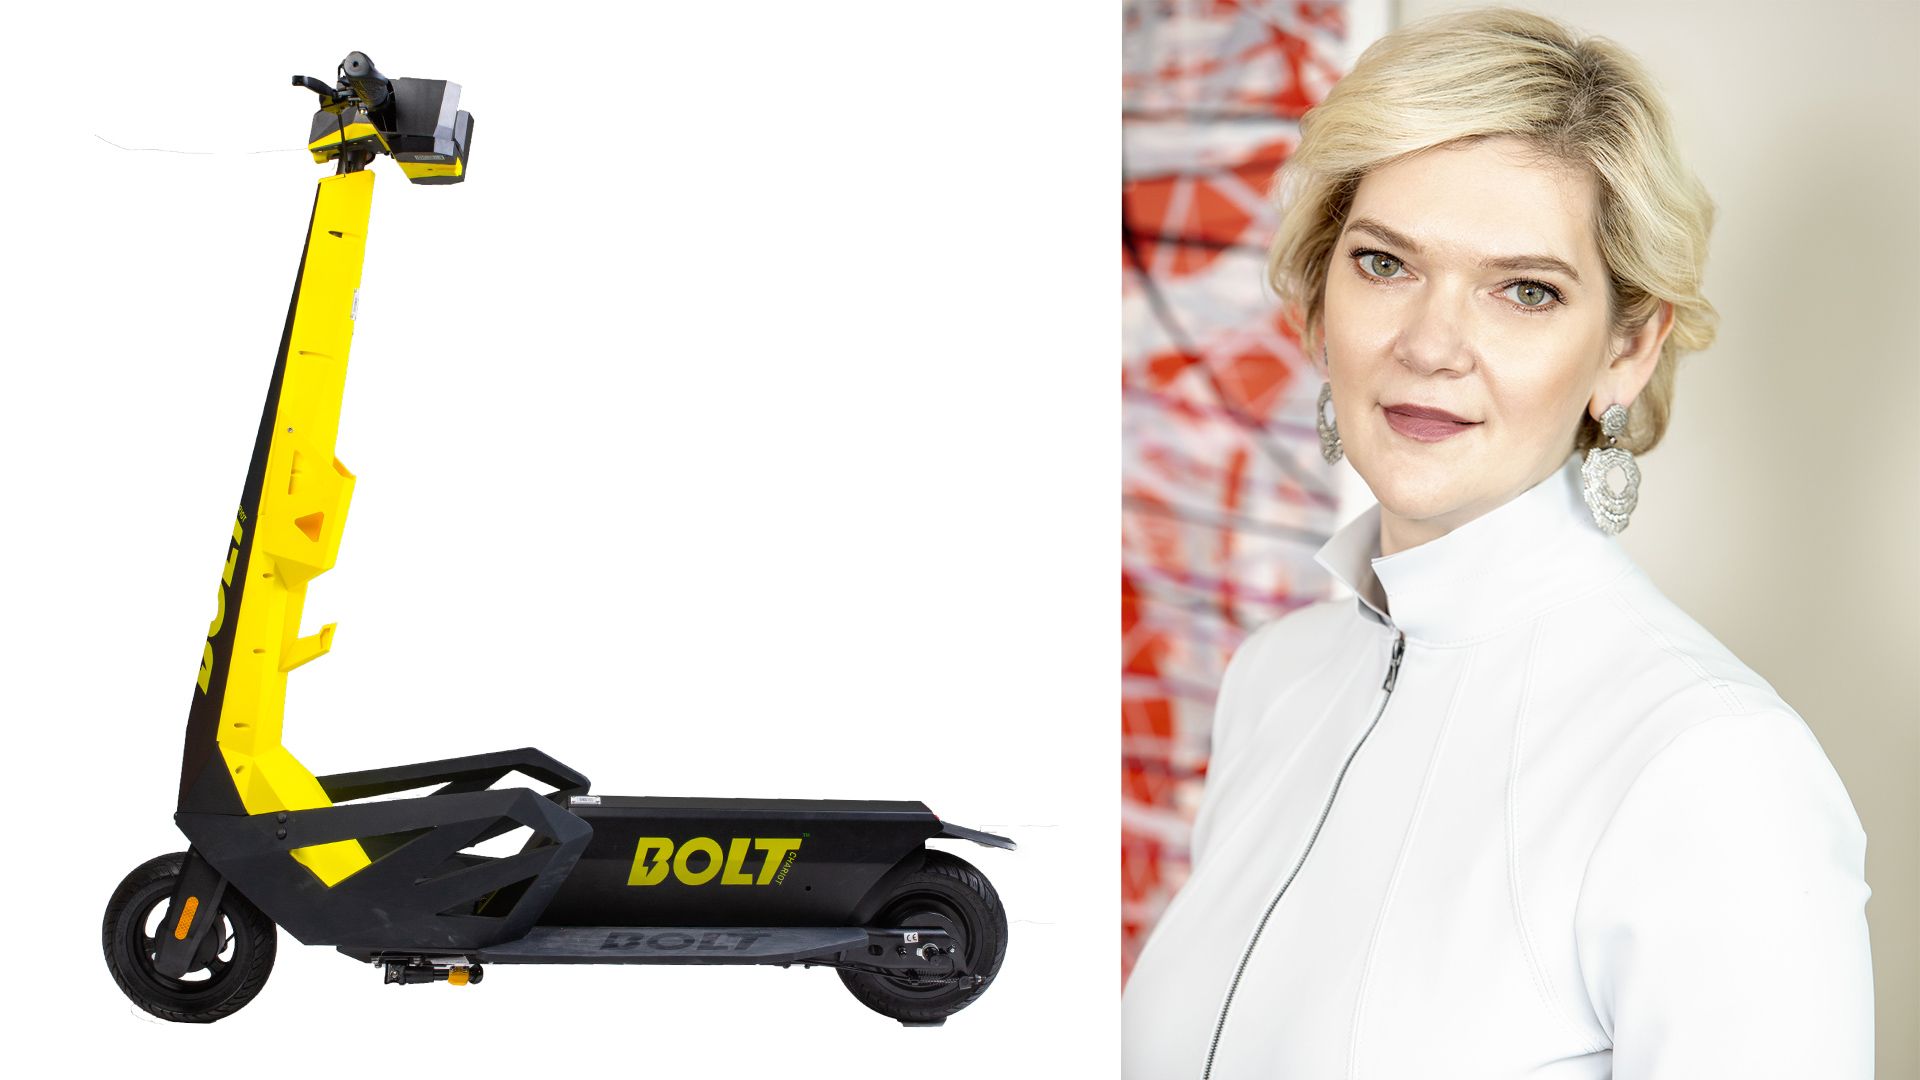 Photo collage of CEO Julia Steyn and a Bolt scooter